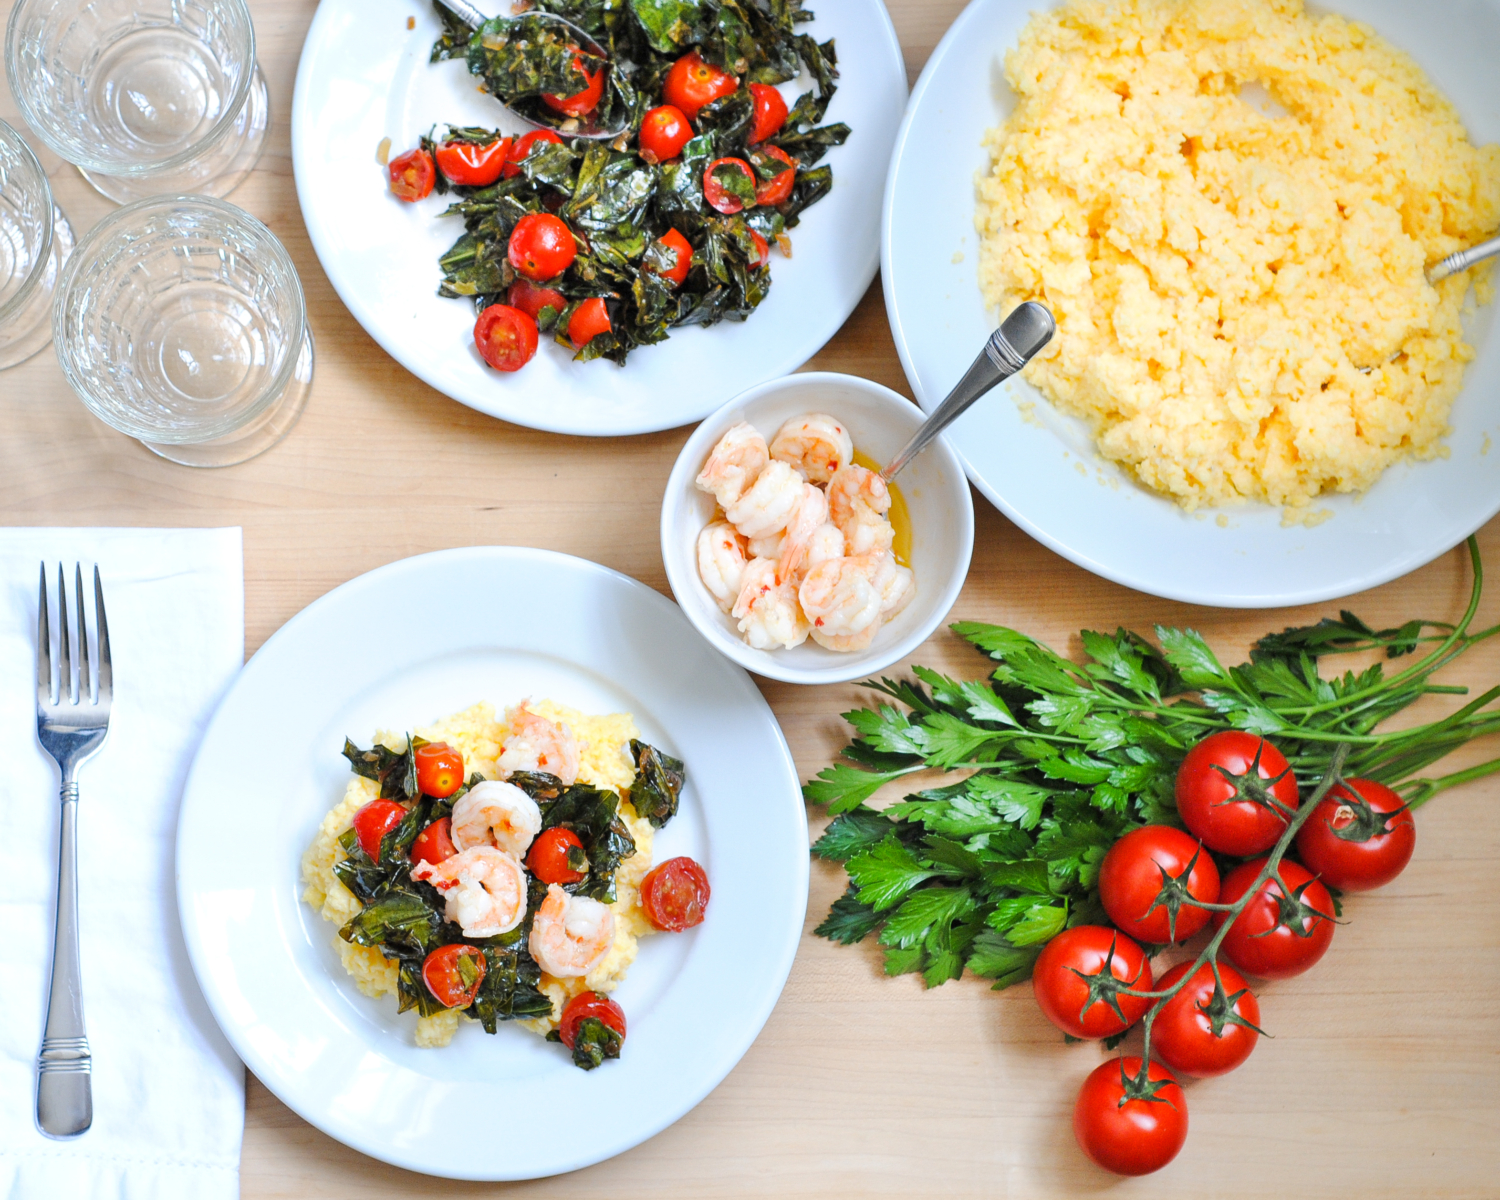 Healthy shrimp and grits recipe with collard greens and tomatoes - super easy and delicious, ready in 30 minutes!